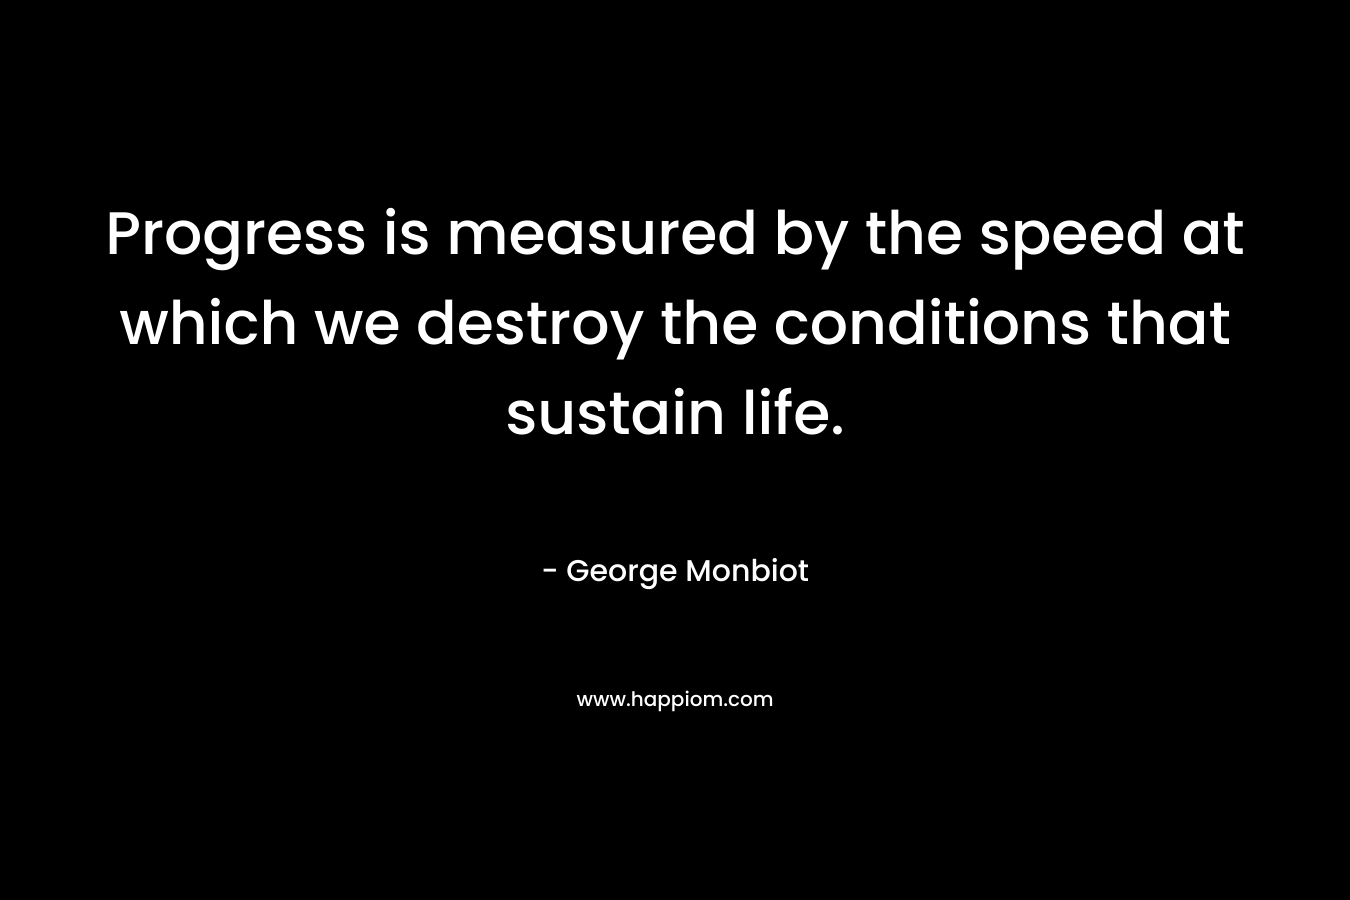 Progress is measured by the speed at which we destroy the conditions that sustain life. – George Monbiot